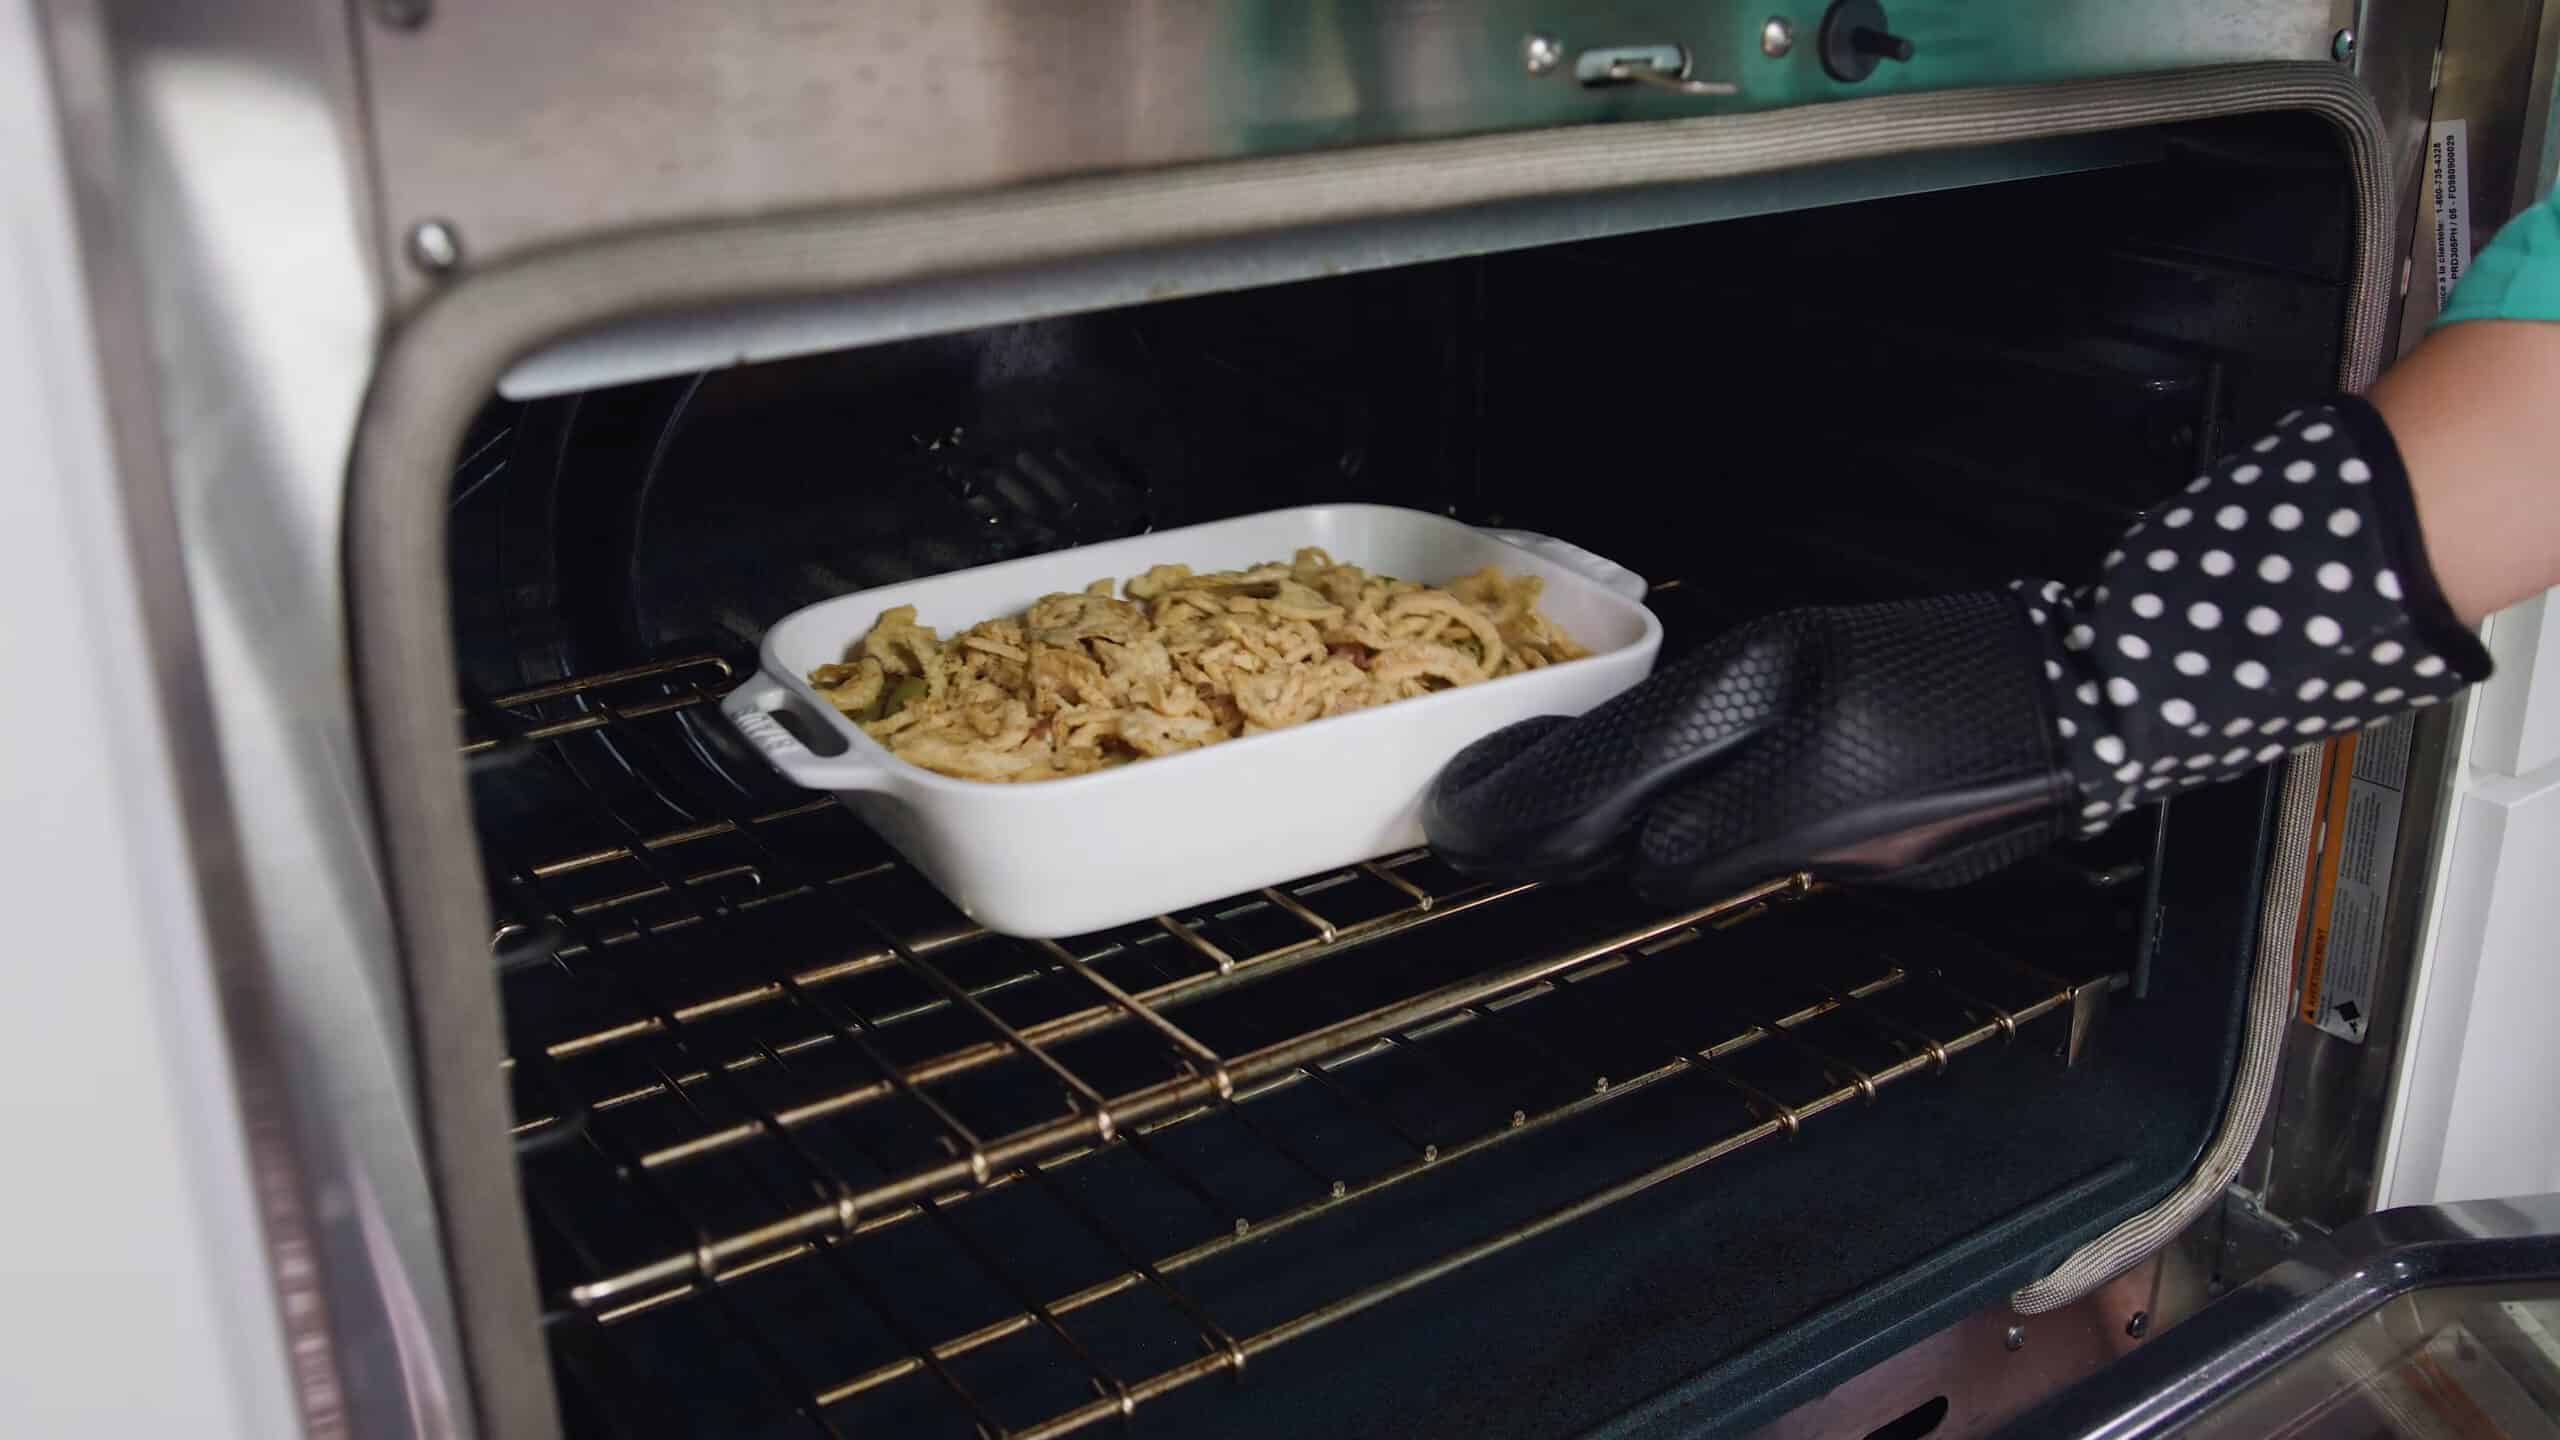 Angled view of open oven with white casserole dish filled with green bean casserole filling and topped with French fried onions, placed on rack in the middle of the oven.